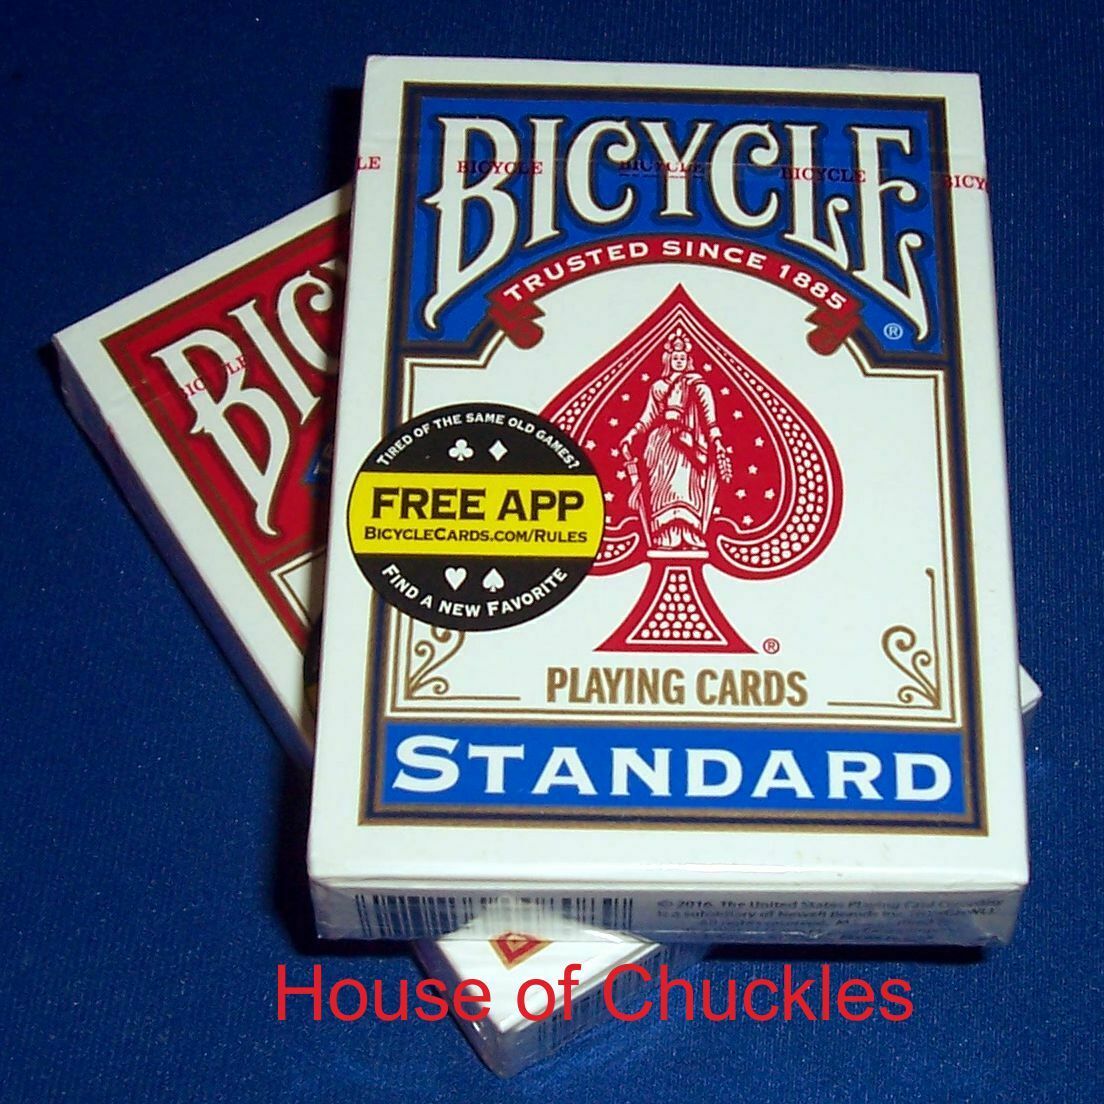 (1) One Way Forcing Playing Card Deck, Bicycle, Magic Trick, 1-way Force